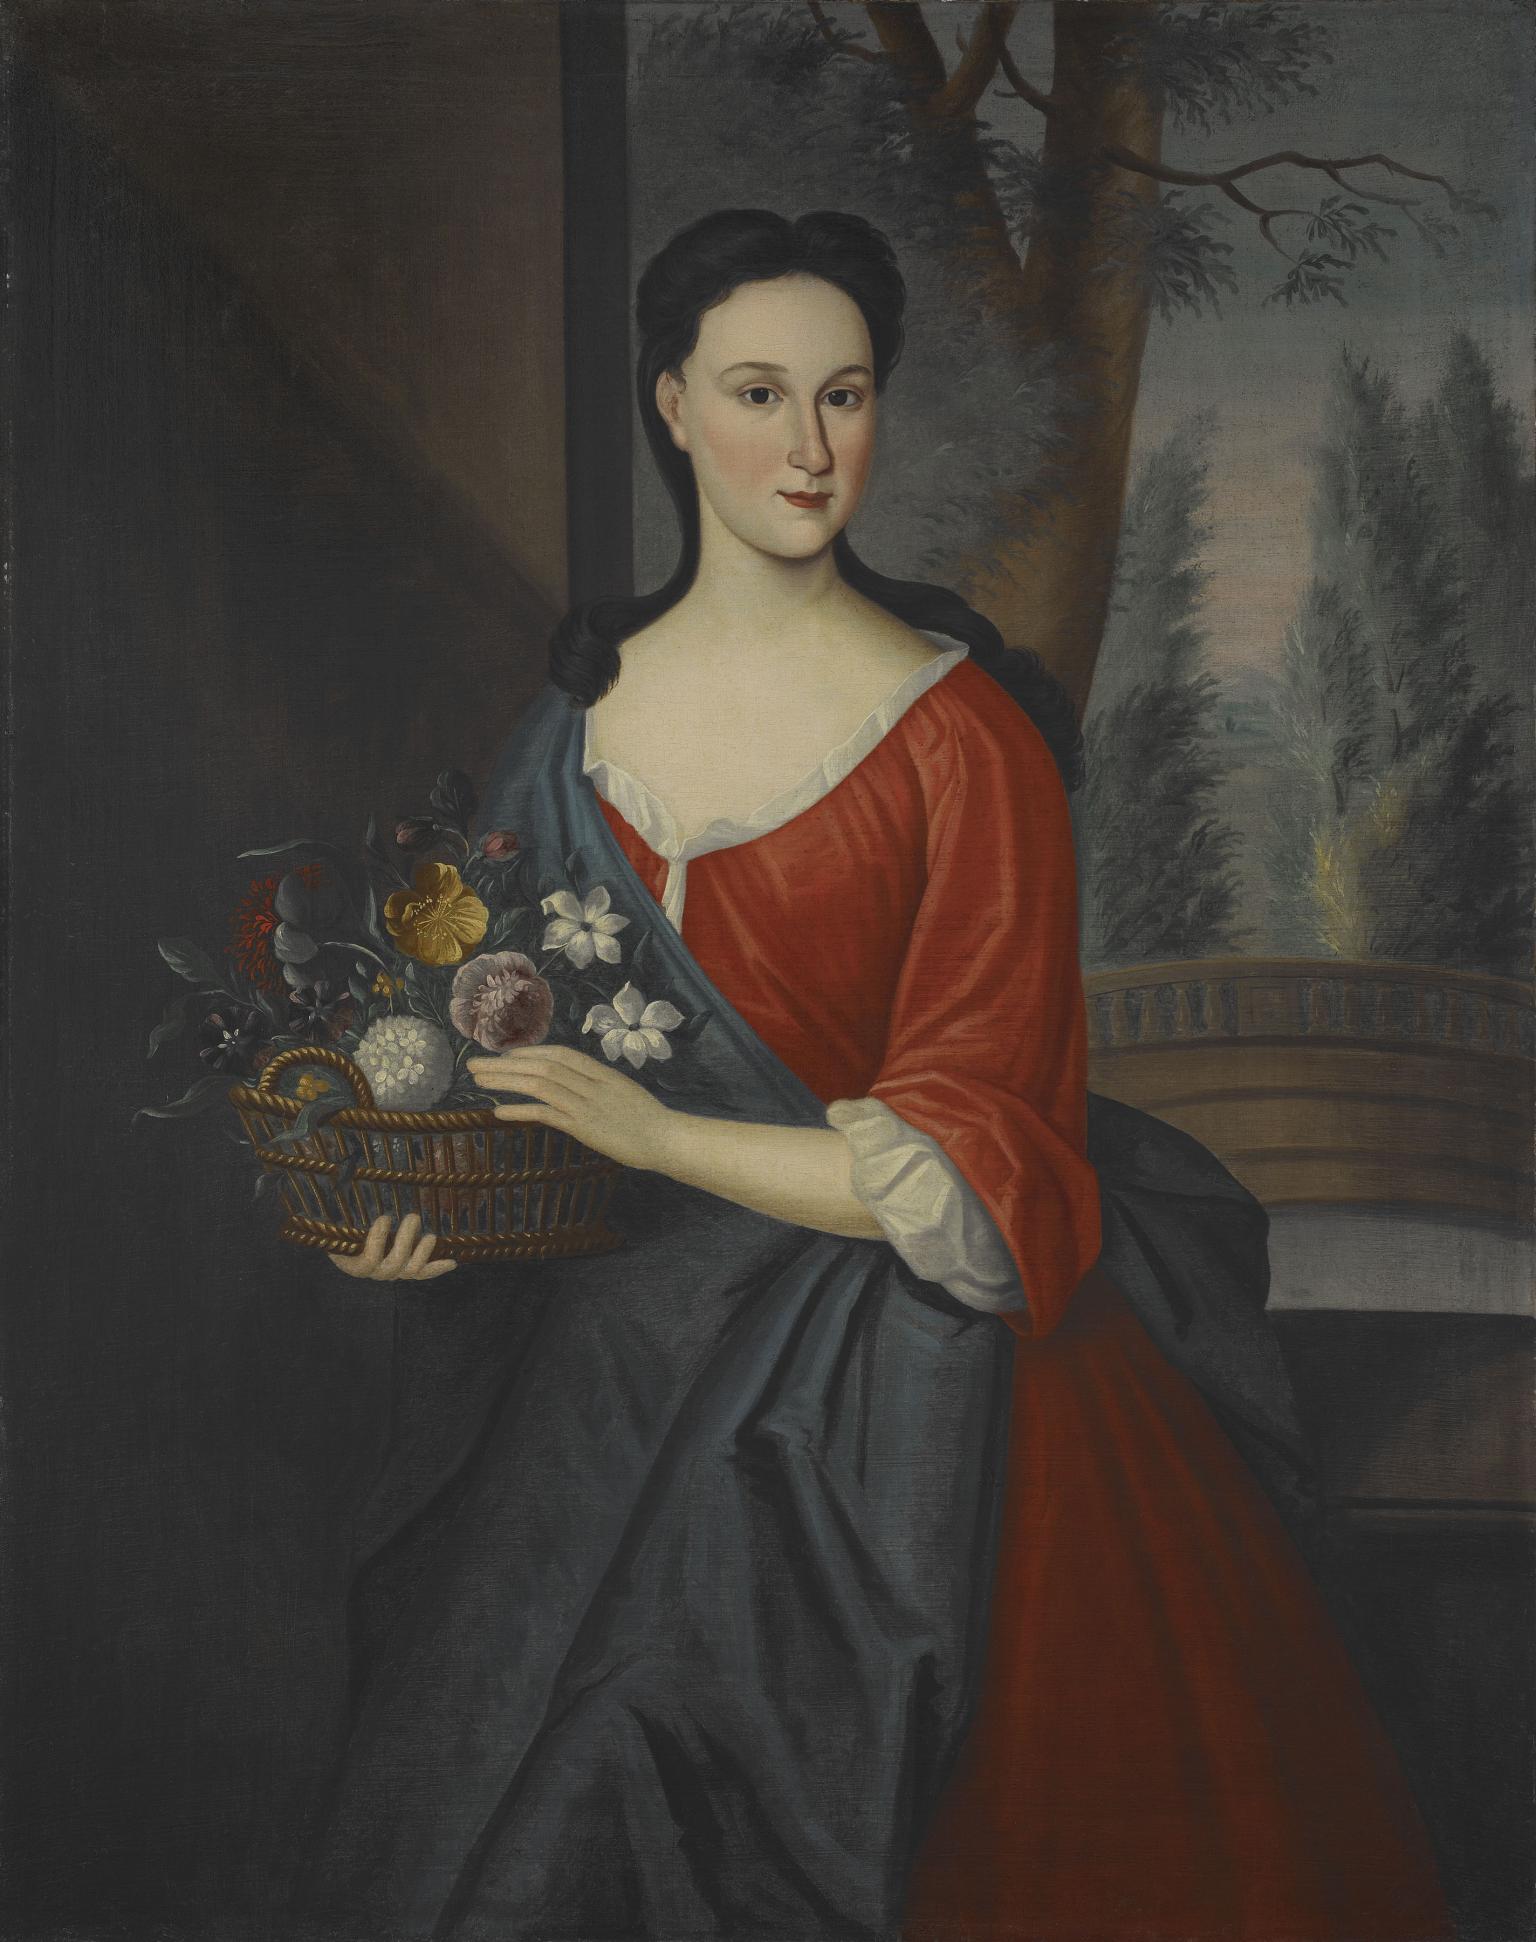 Portrait painting of woman in dress holding basket of flowers.